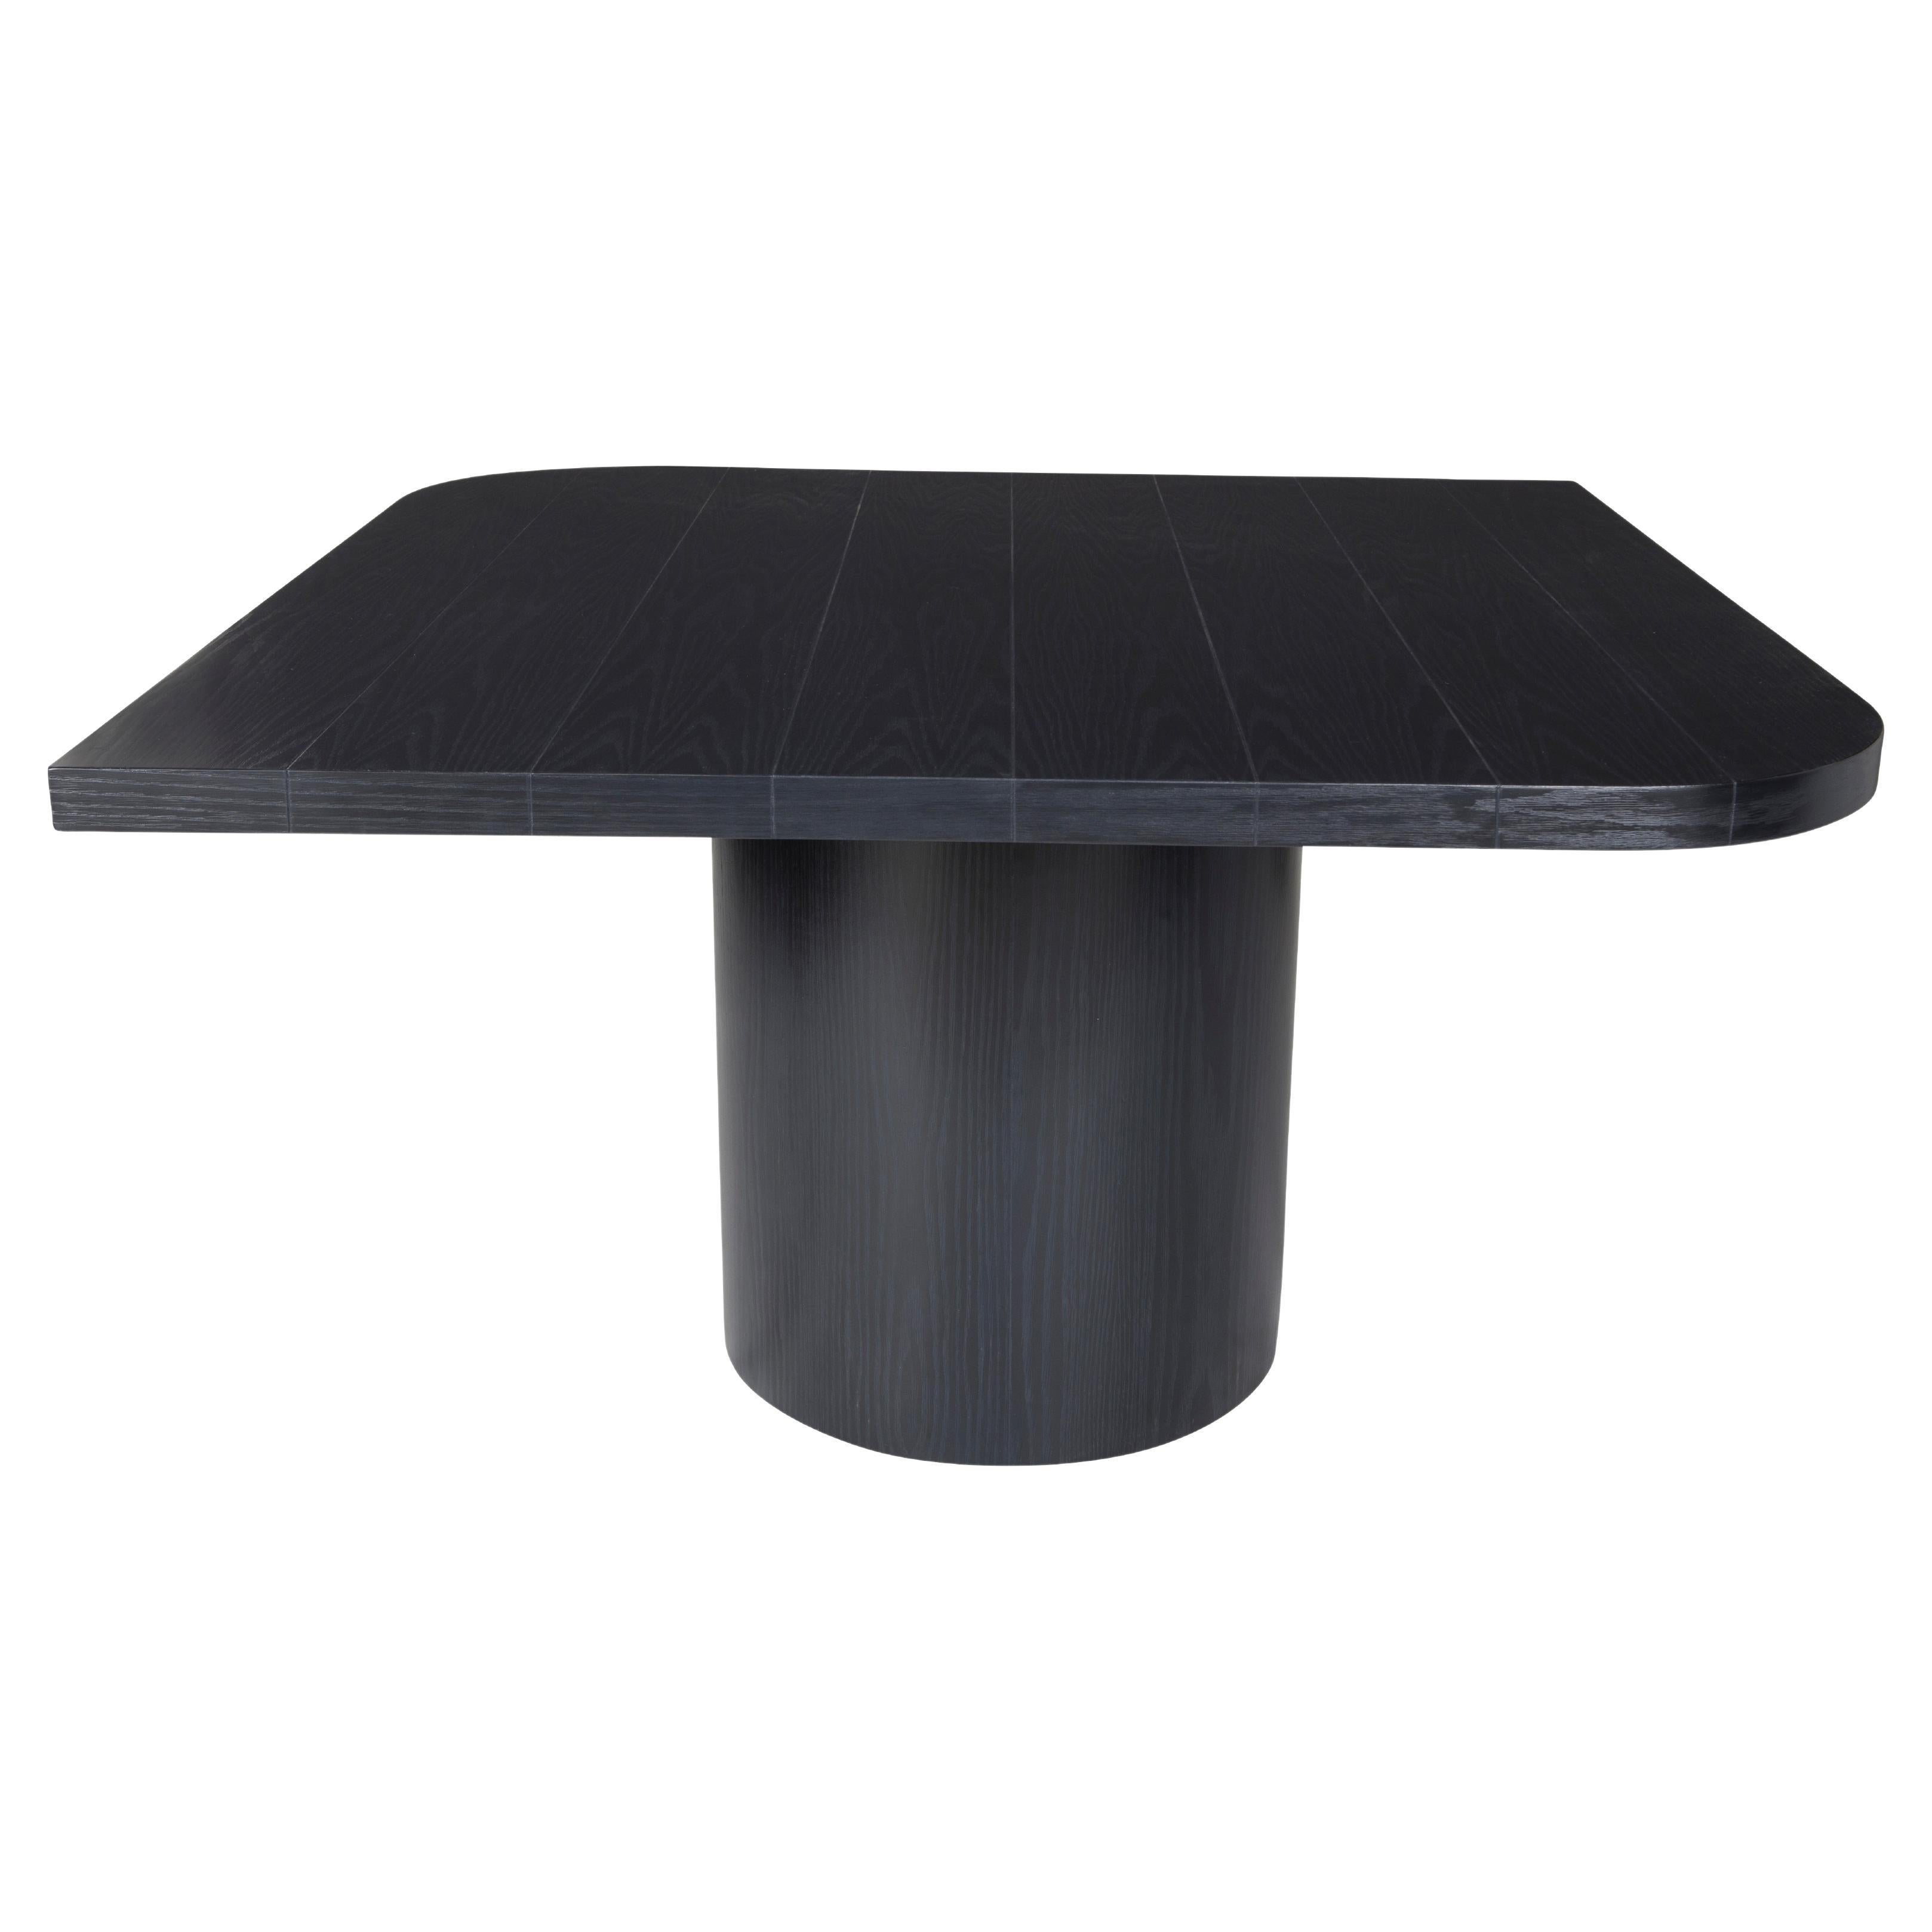 Oak Plank Top Games Table in Onyx Finish with Opposing Corners For Sale